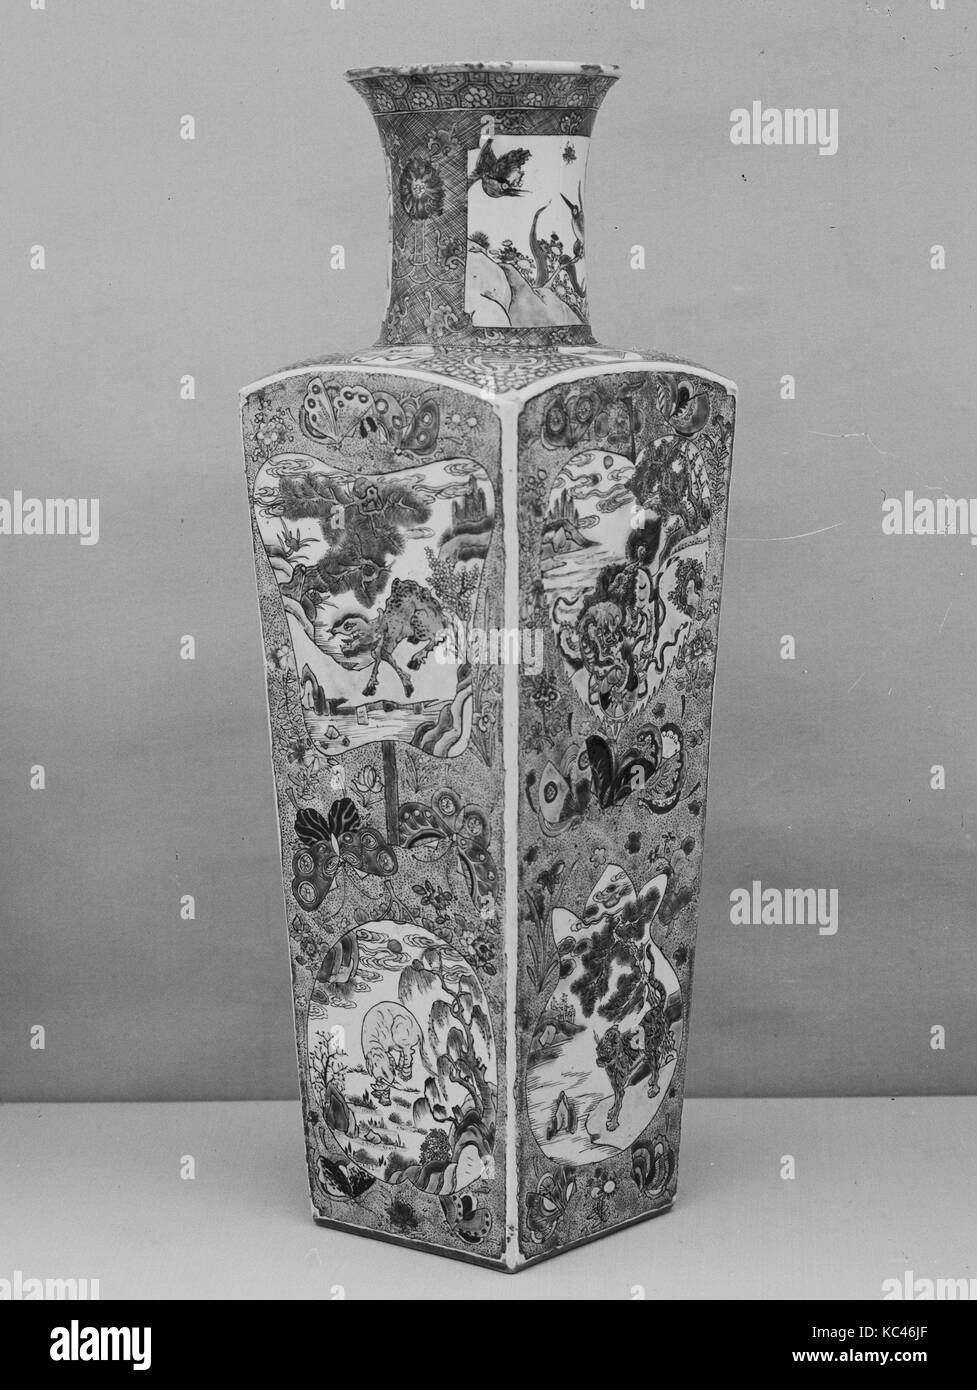 Vase with Animals and Mythical Creatures, early 18th century Stock Photo